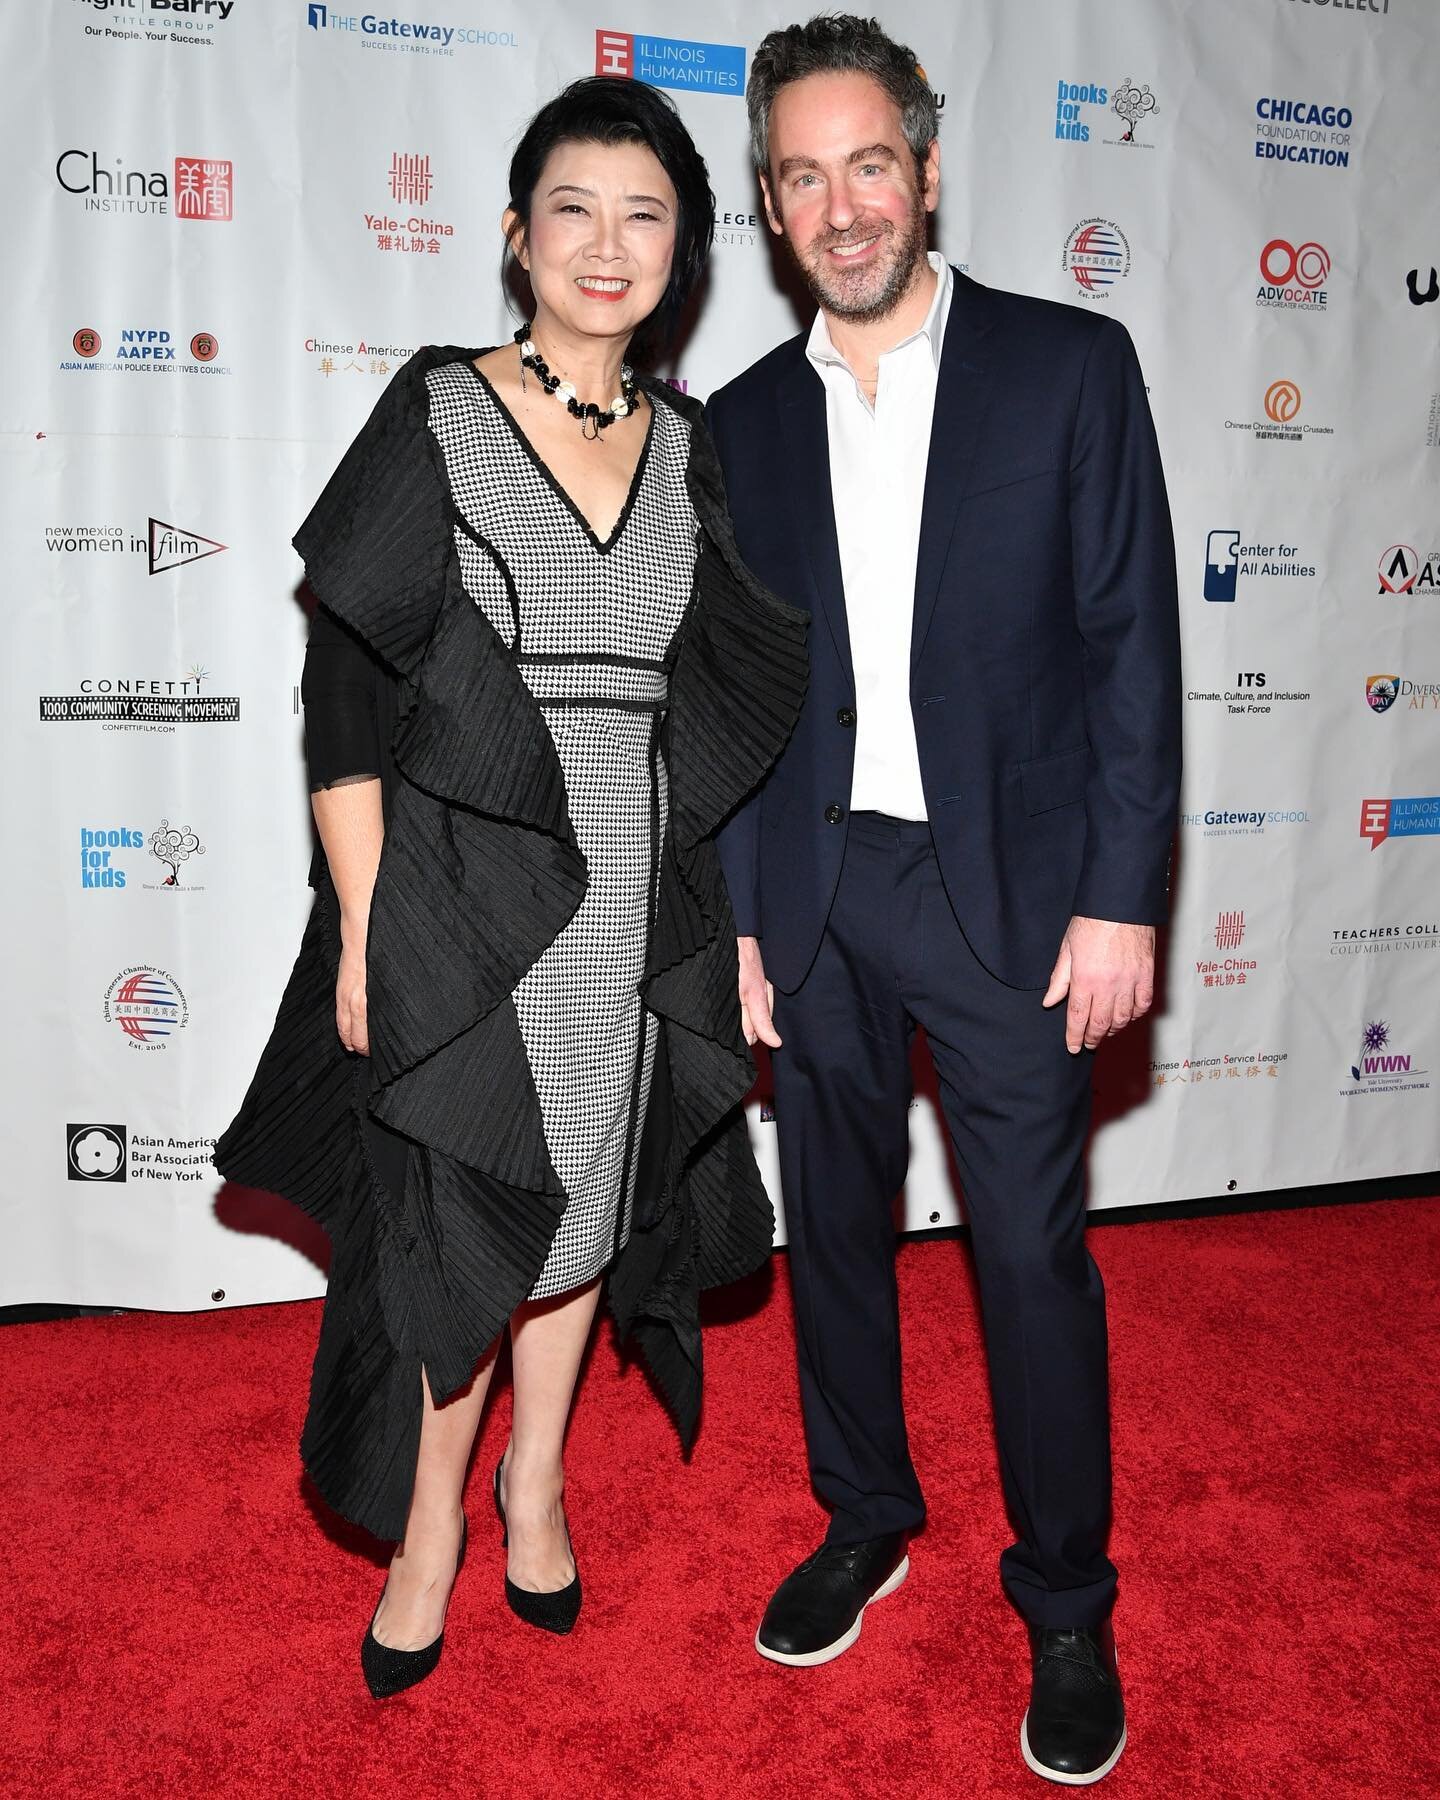 Writer/Director Ann Hu and producer Josh Green reunite on the red carpet for the first time since the production wrapped. Without them, this movie, this movement would have been impossible! The cast, crew, hosts, educators and the millions of people 